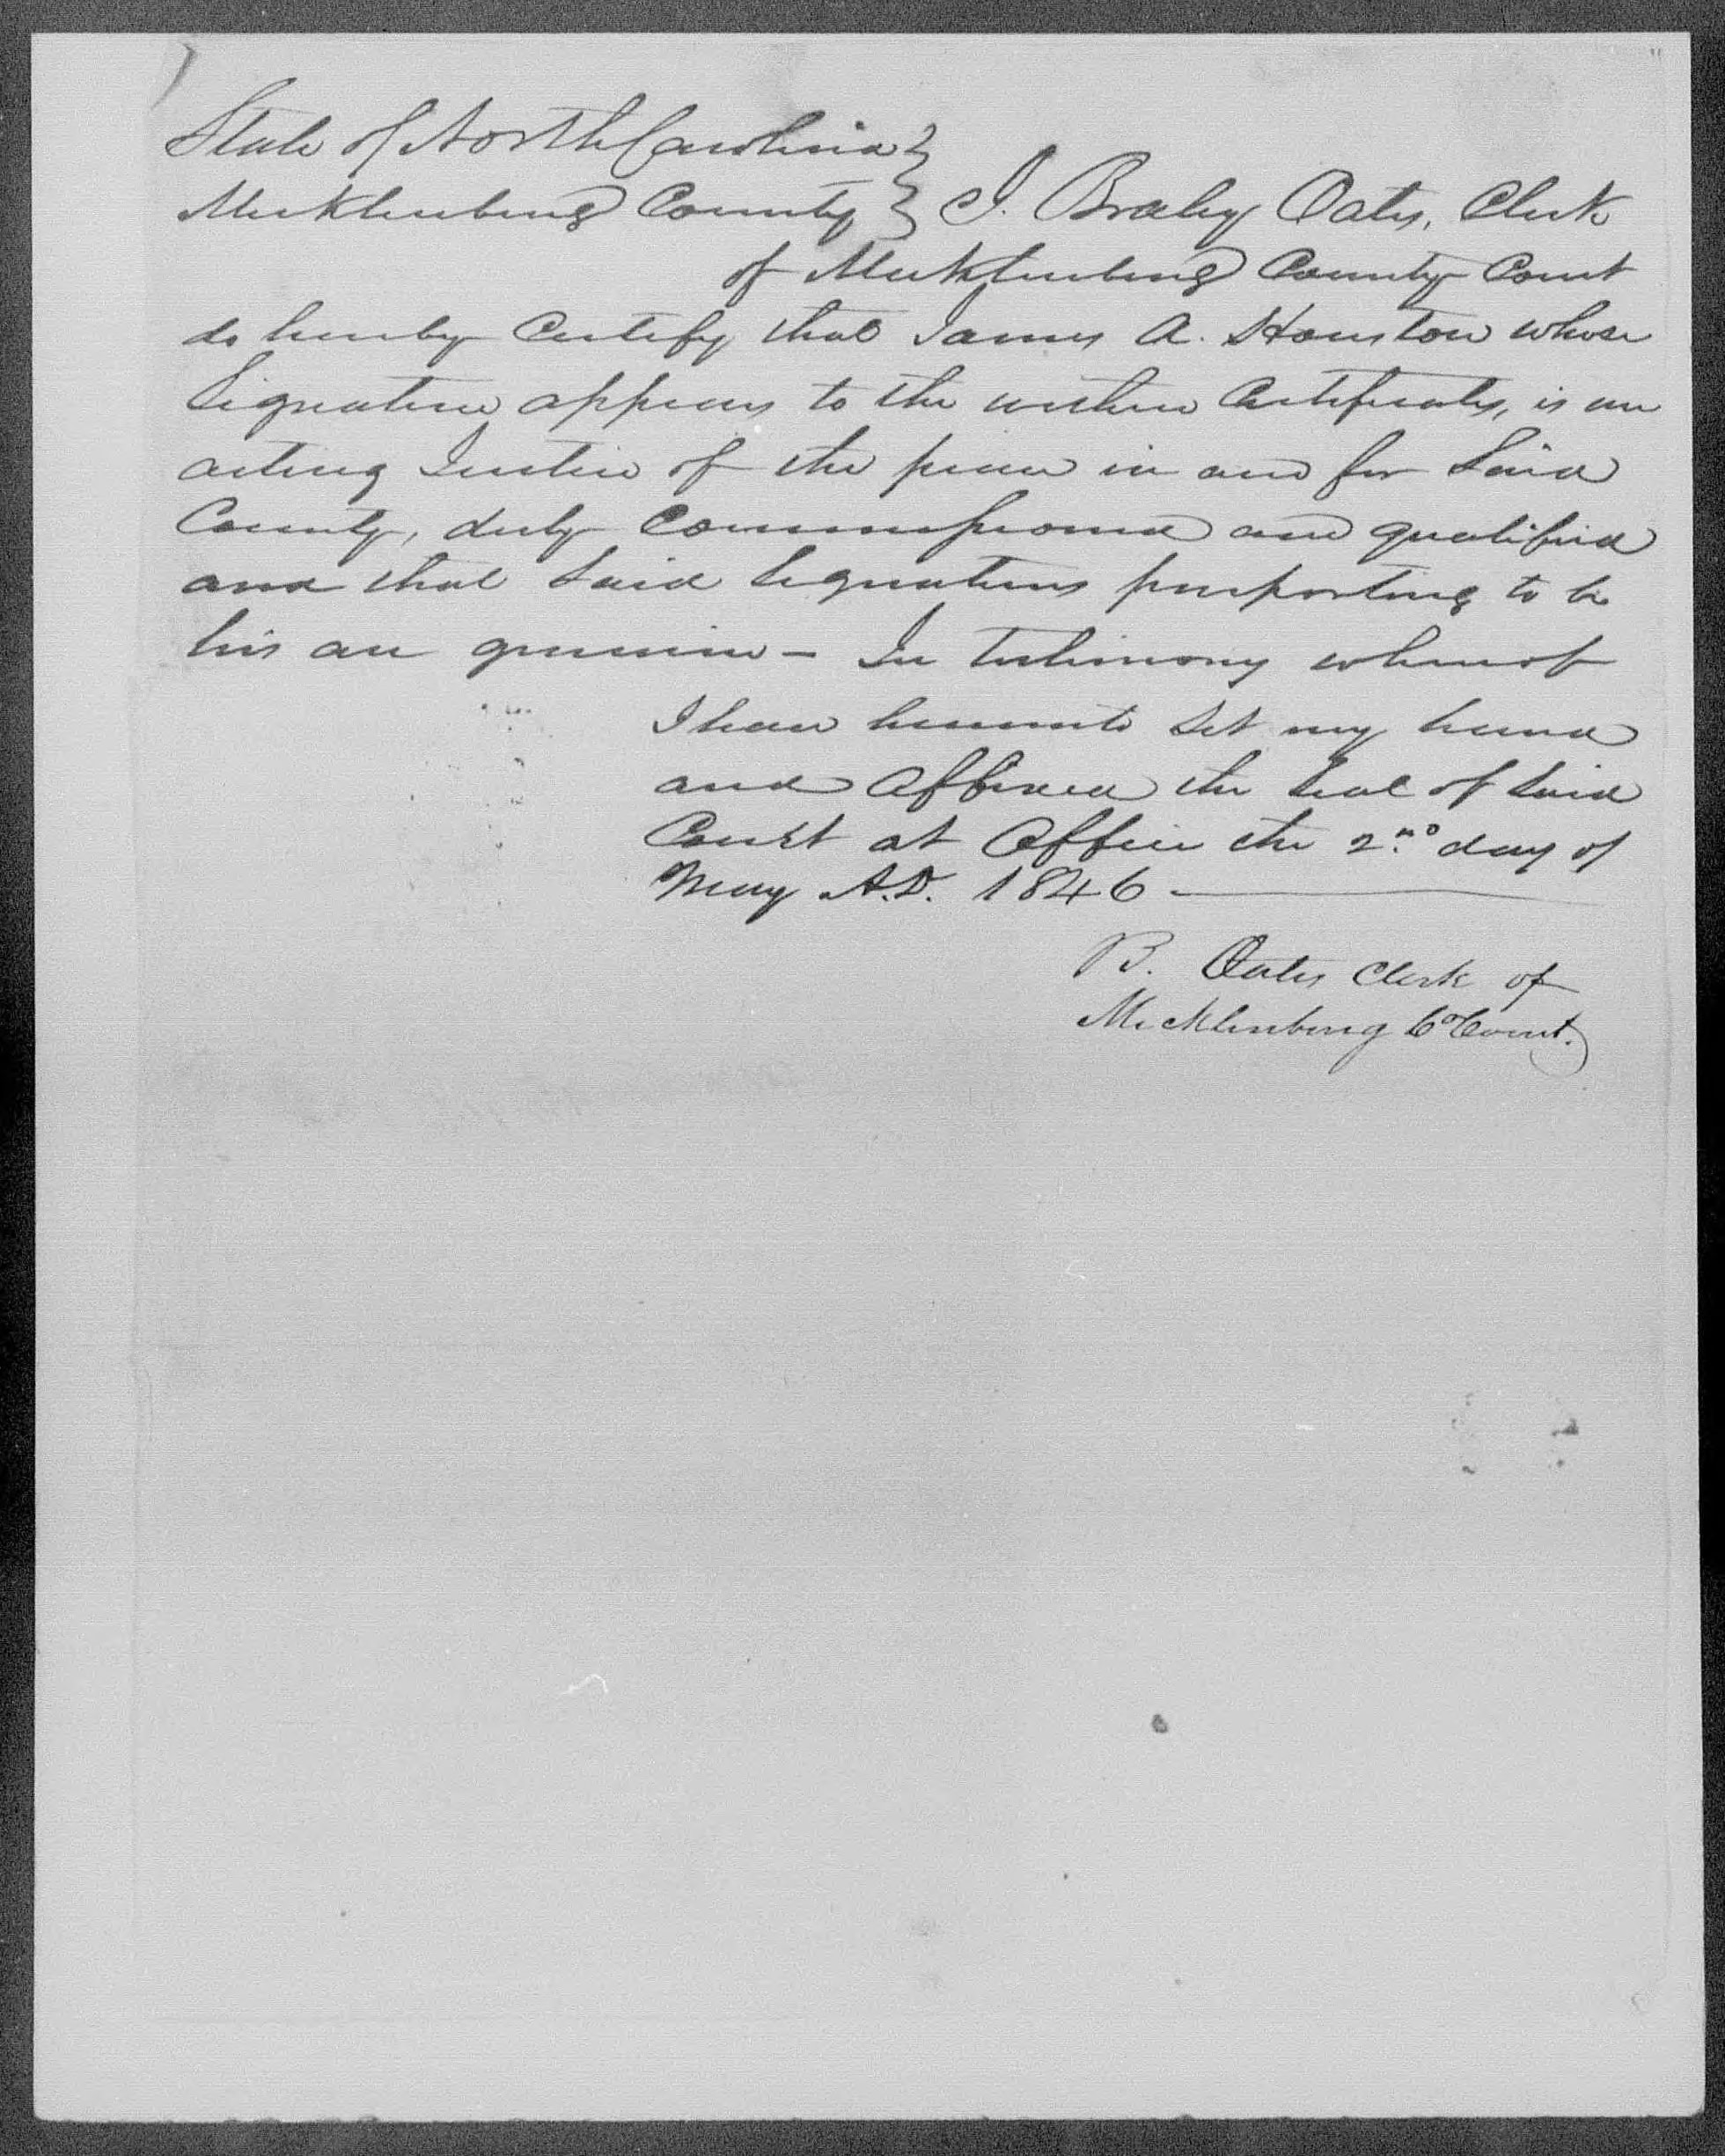 Affidavit of Asseneth Stricklen in support of a Pension Claim for Susana Alexander, 1 May 1846, page 2